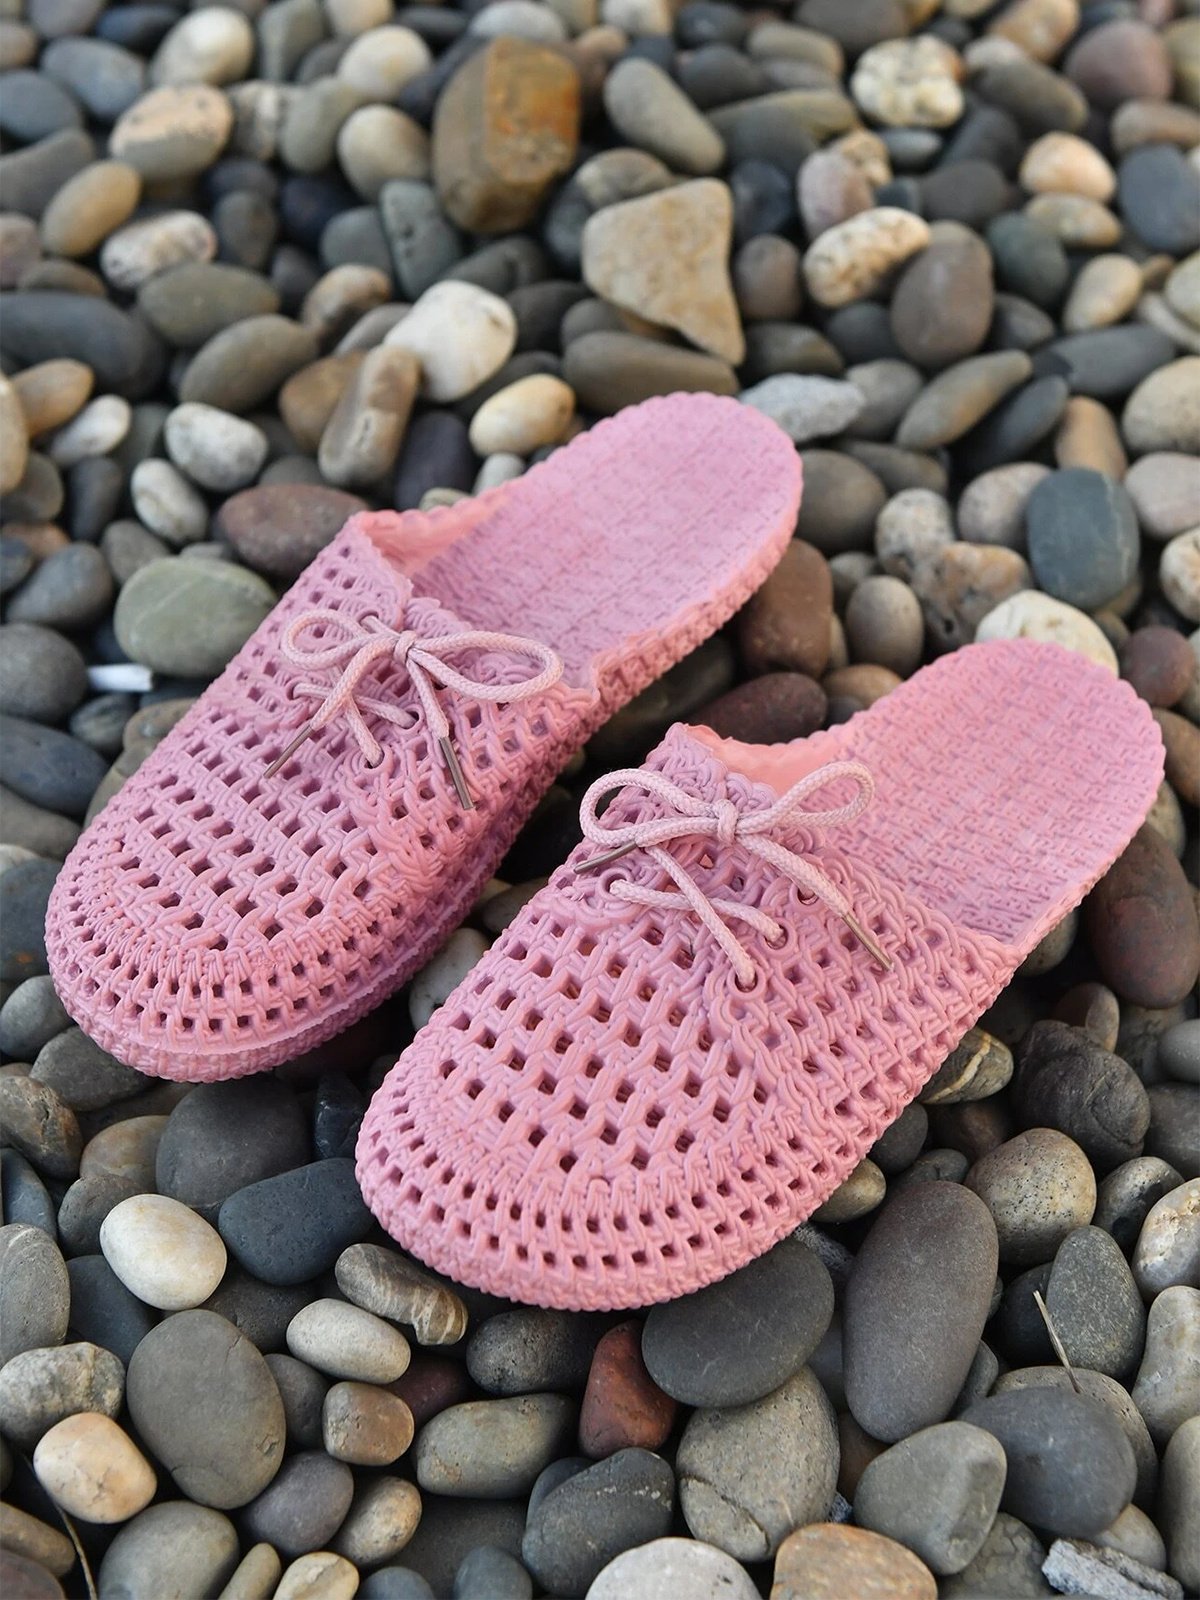 Women Lace Up Hollow Out Waterproof Beach Mules